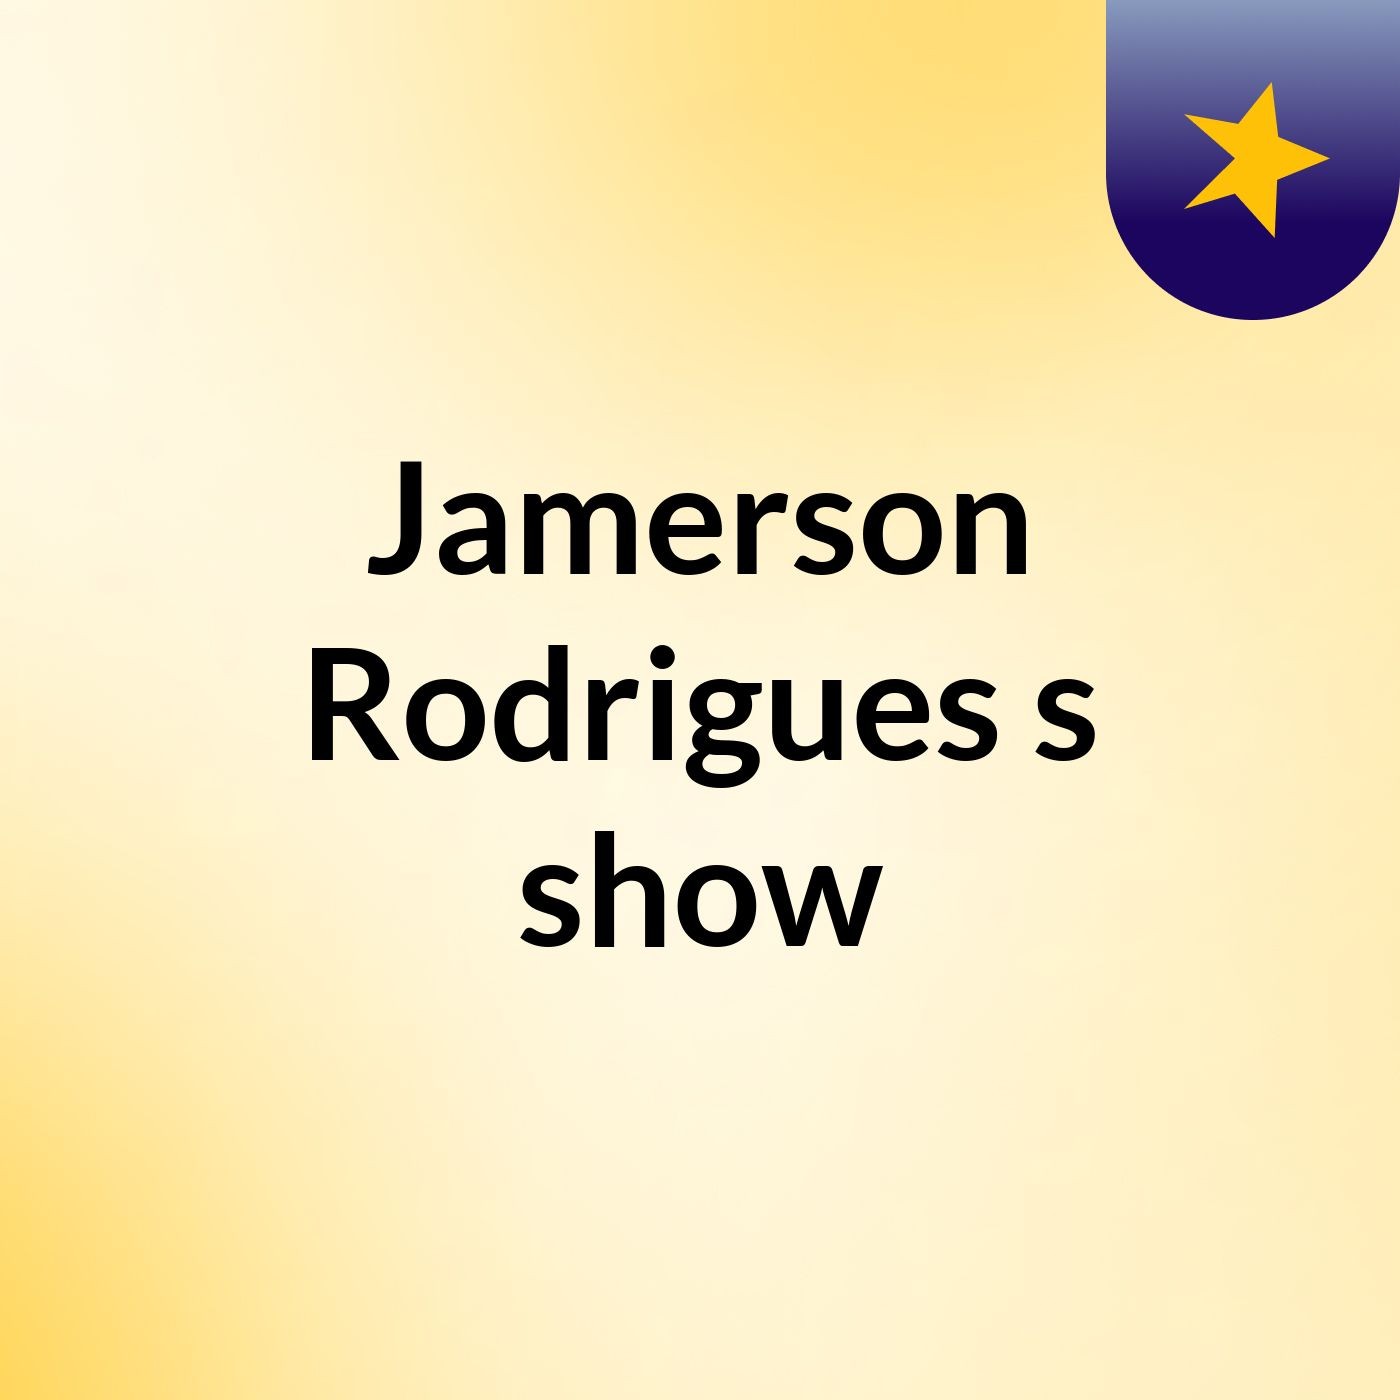 Jamerson Rodrigues's show